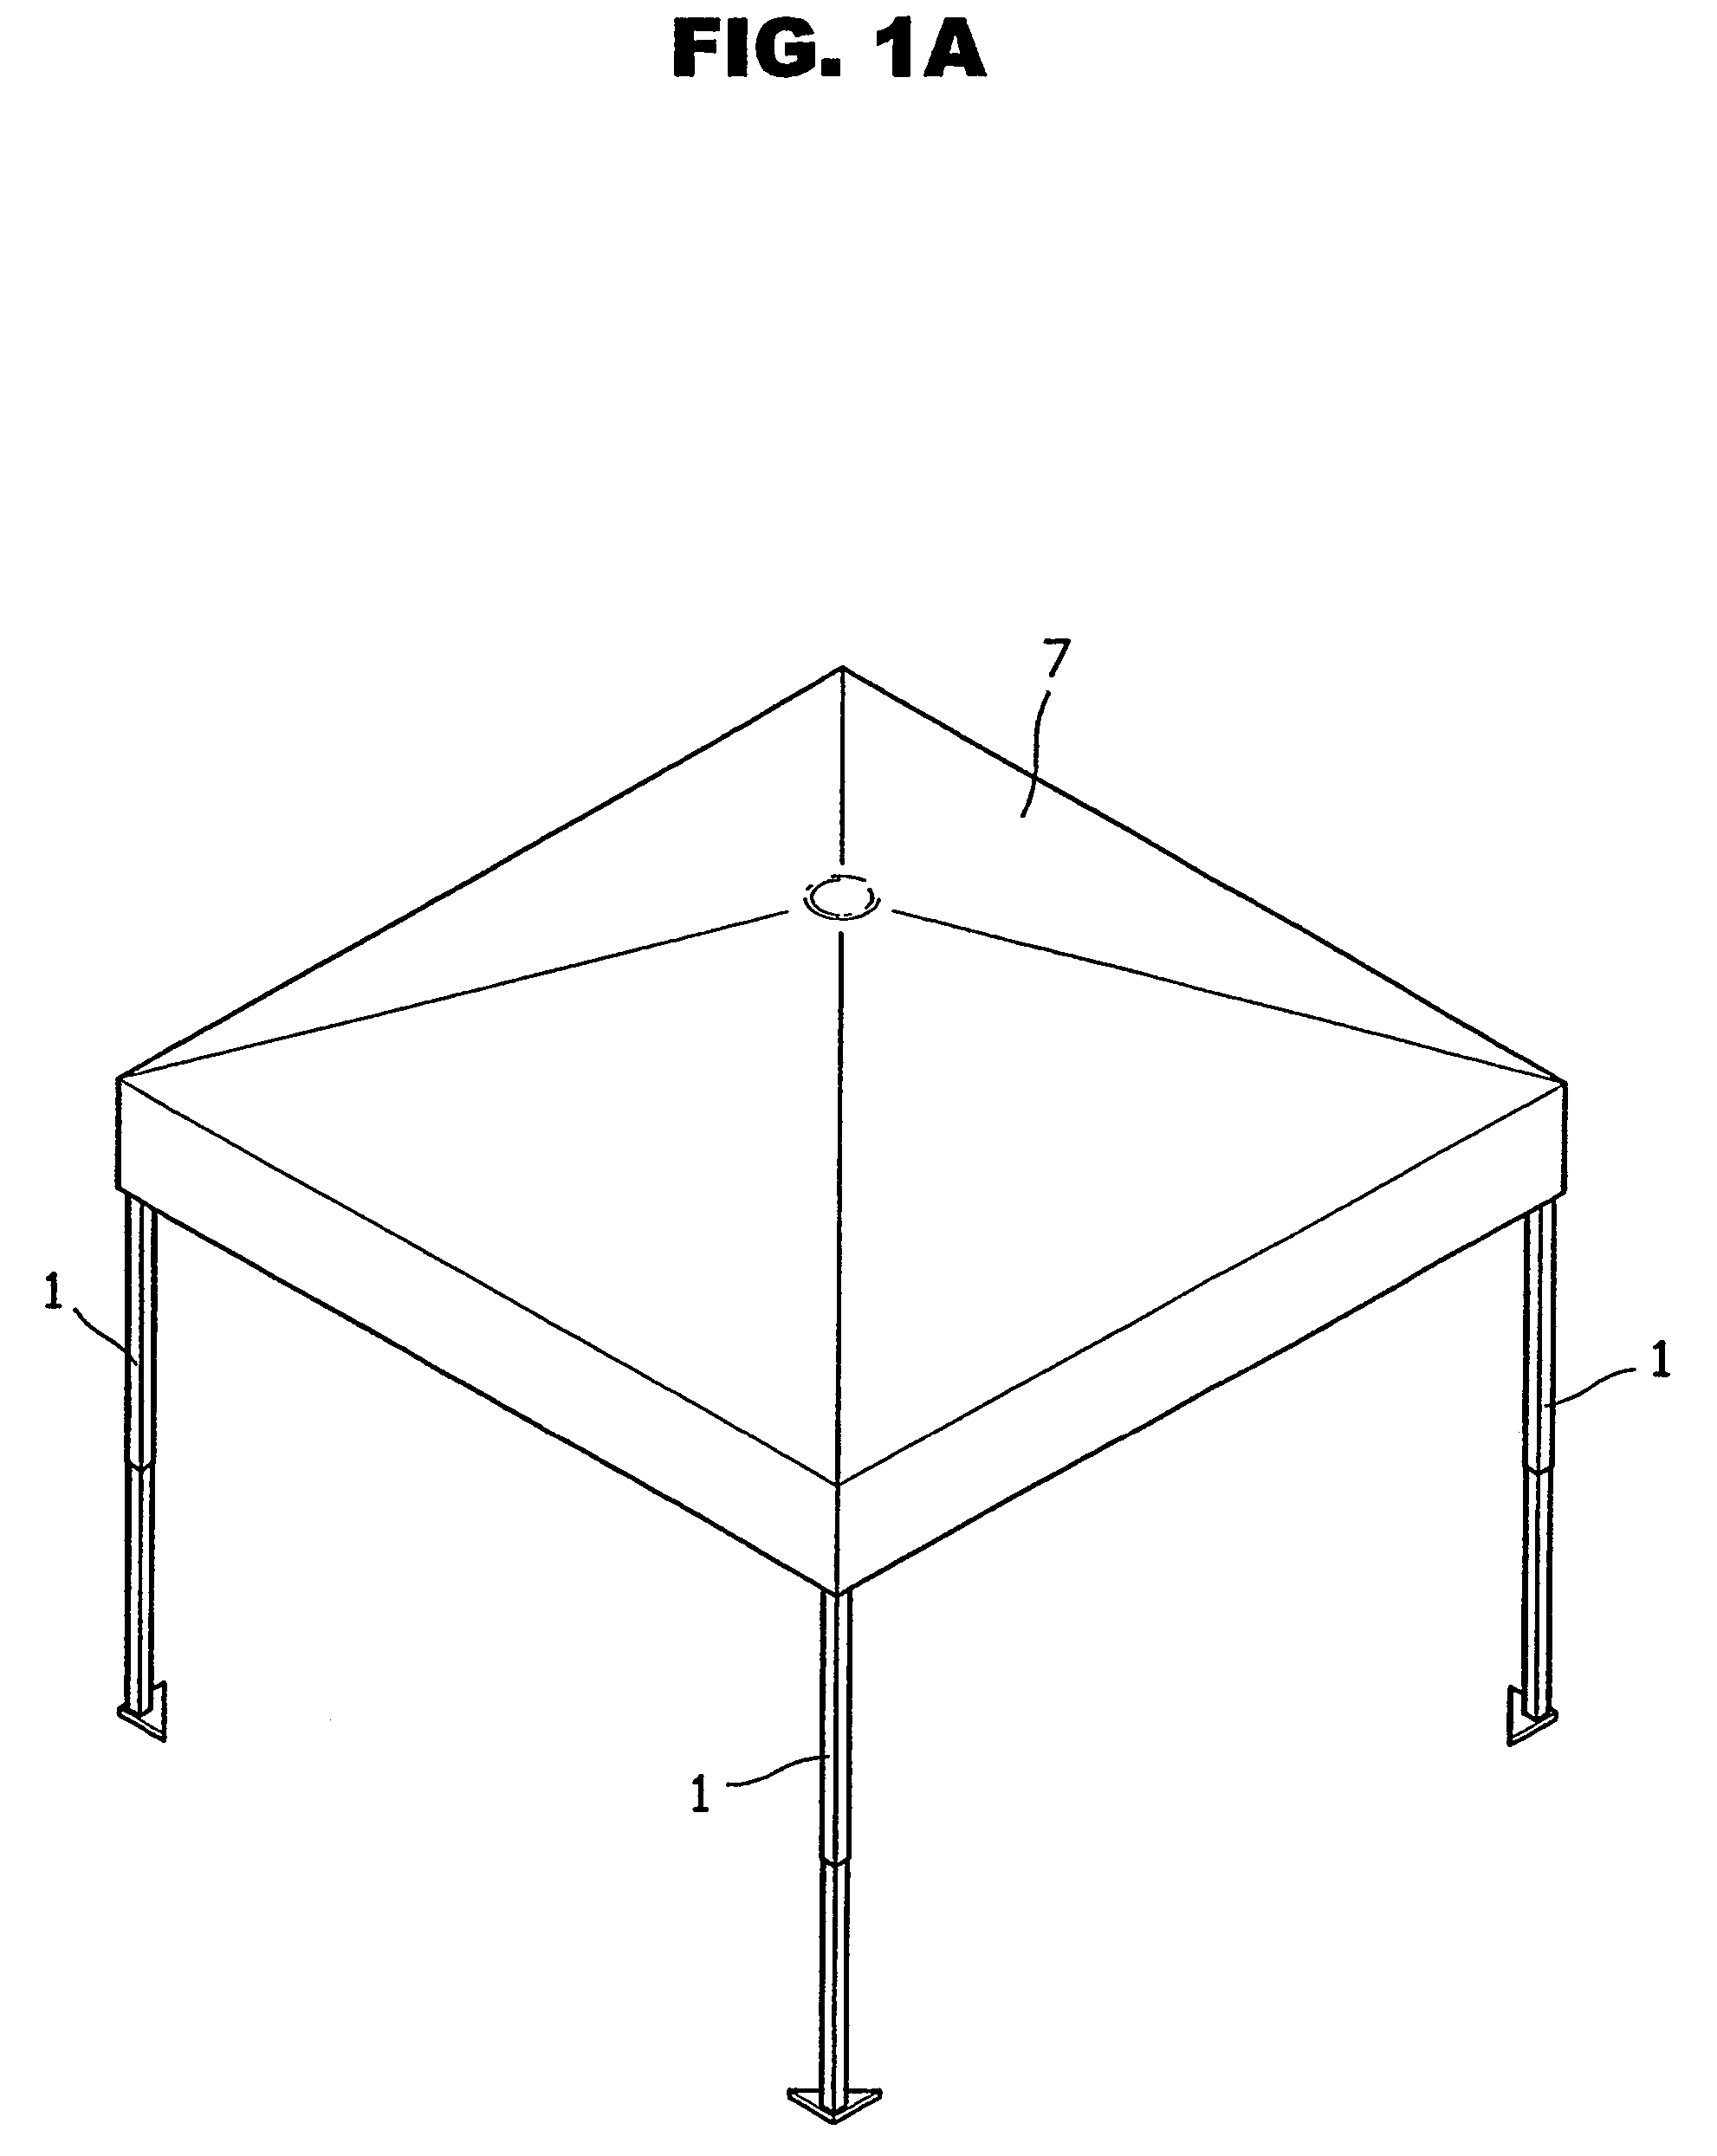 Structure of canopy